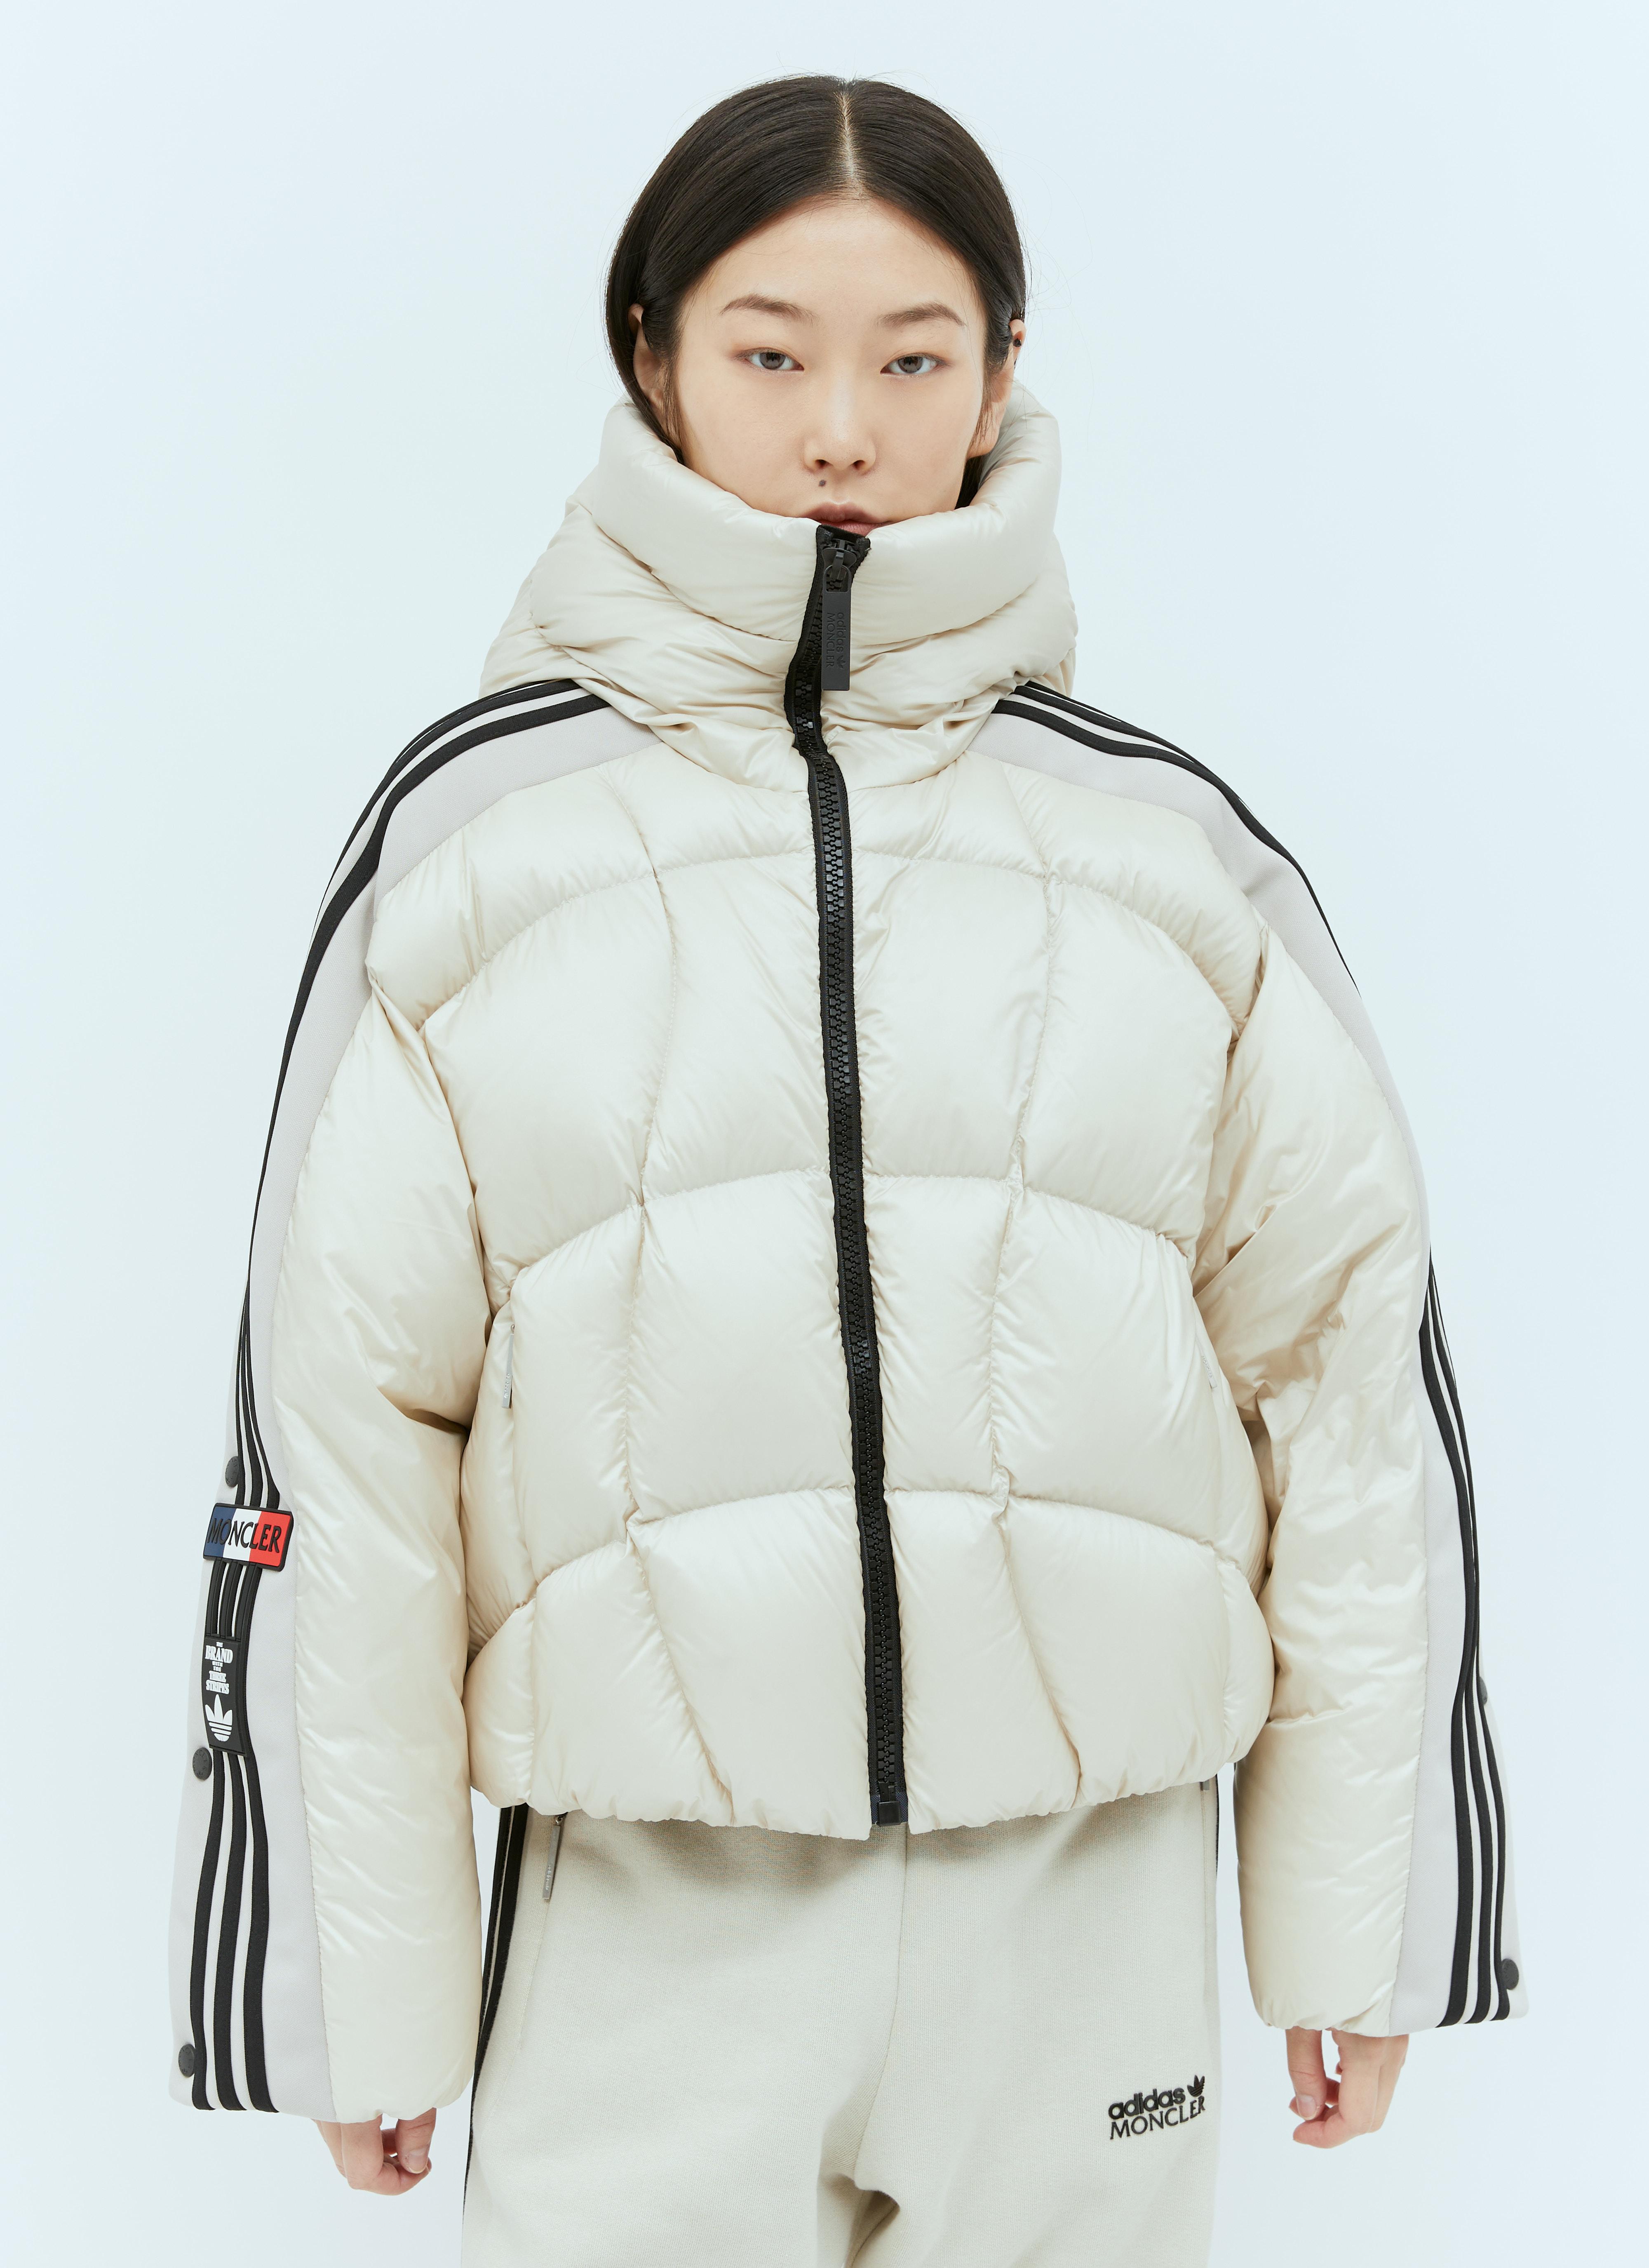 Moncler x adidas Originals Funise Short Down Jacket in Gray | Lyst